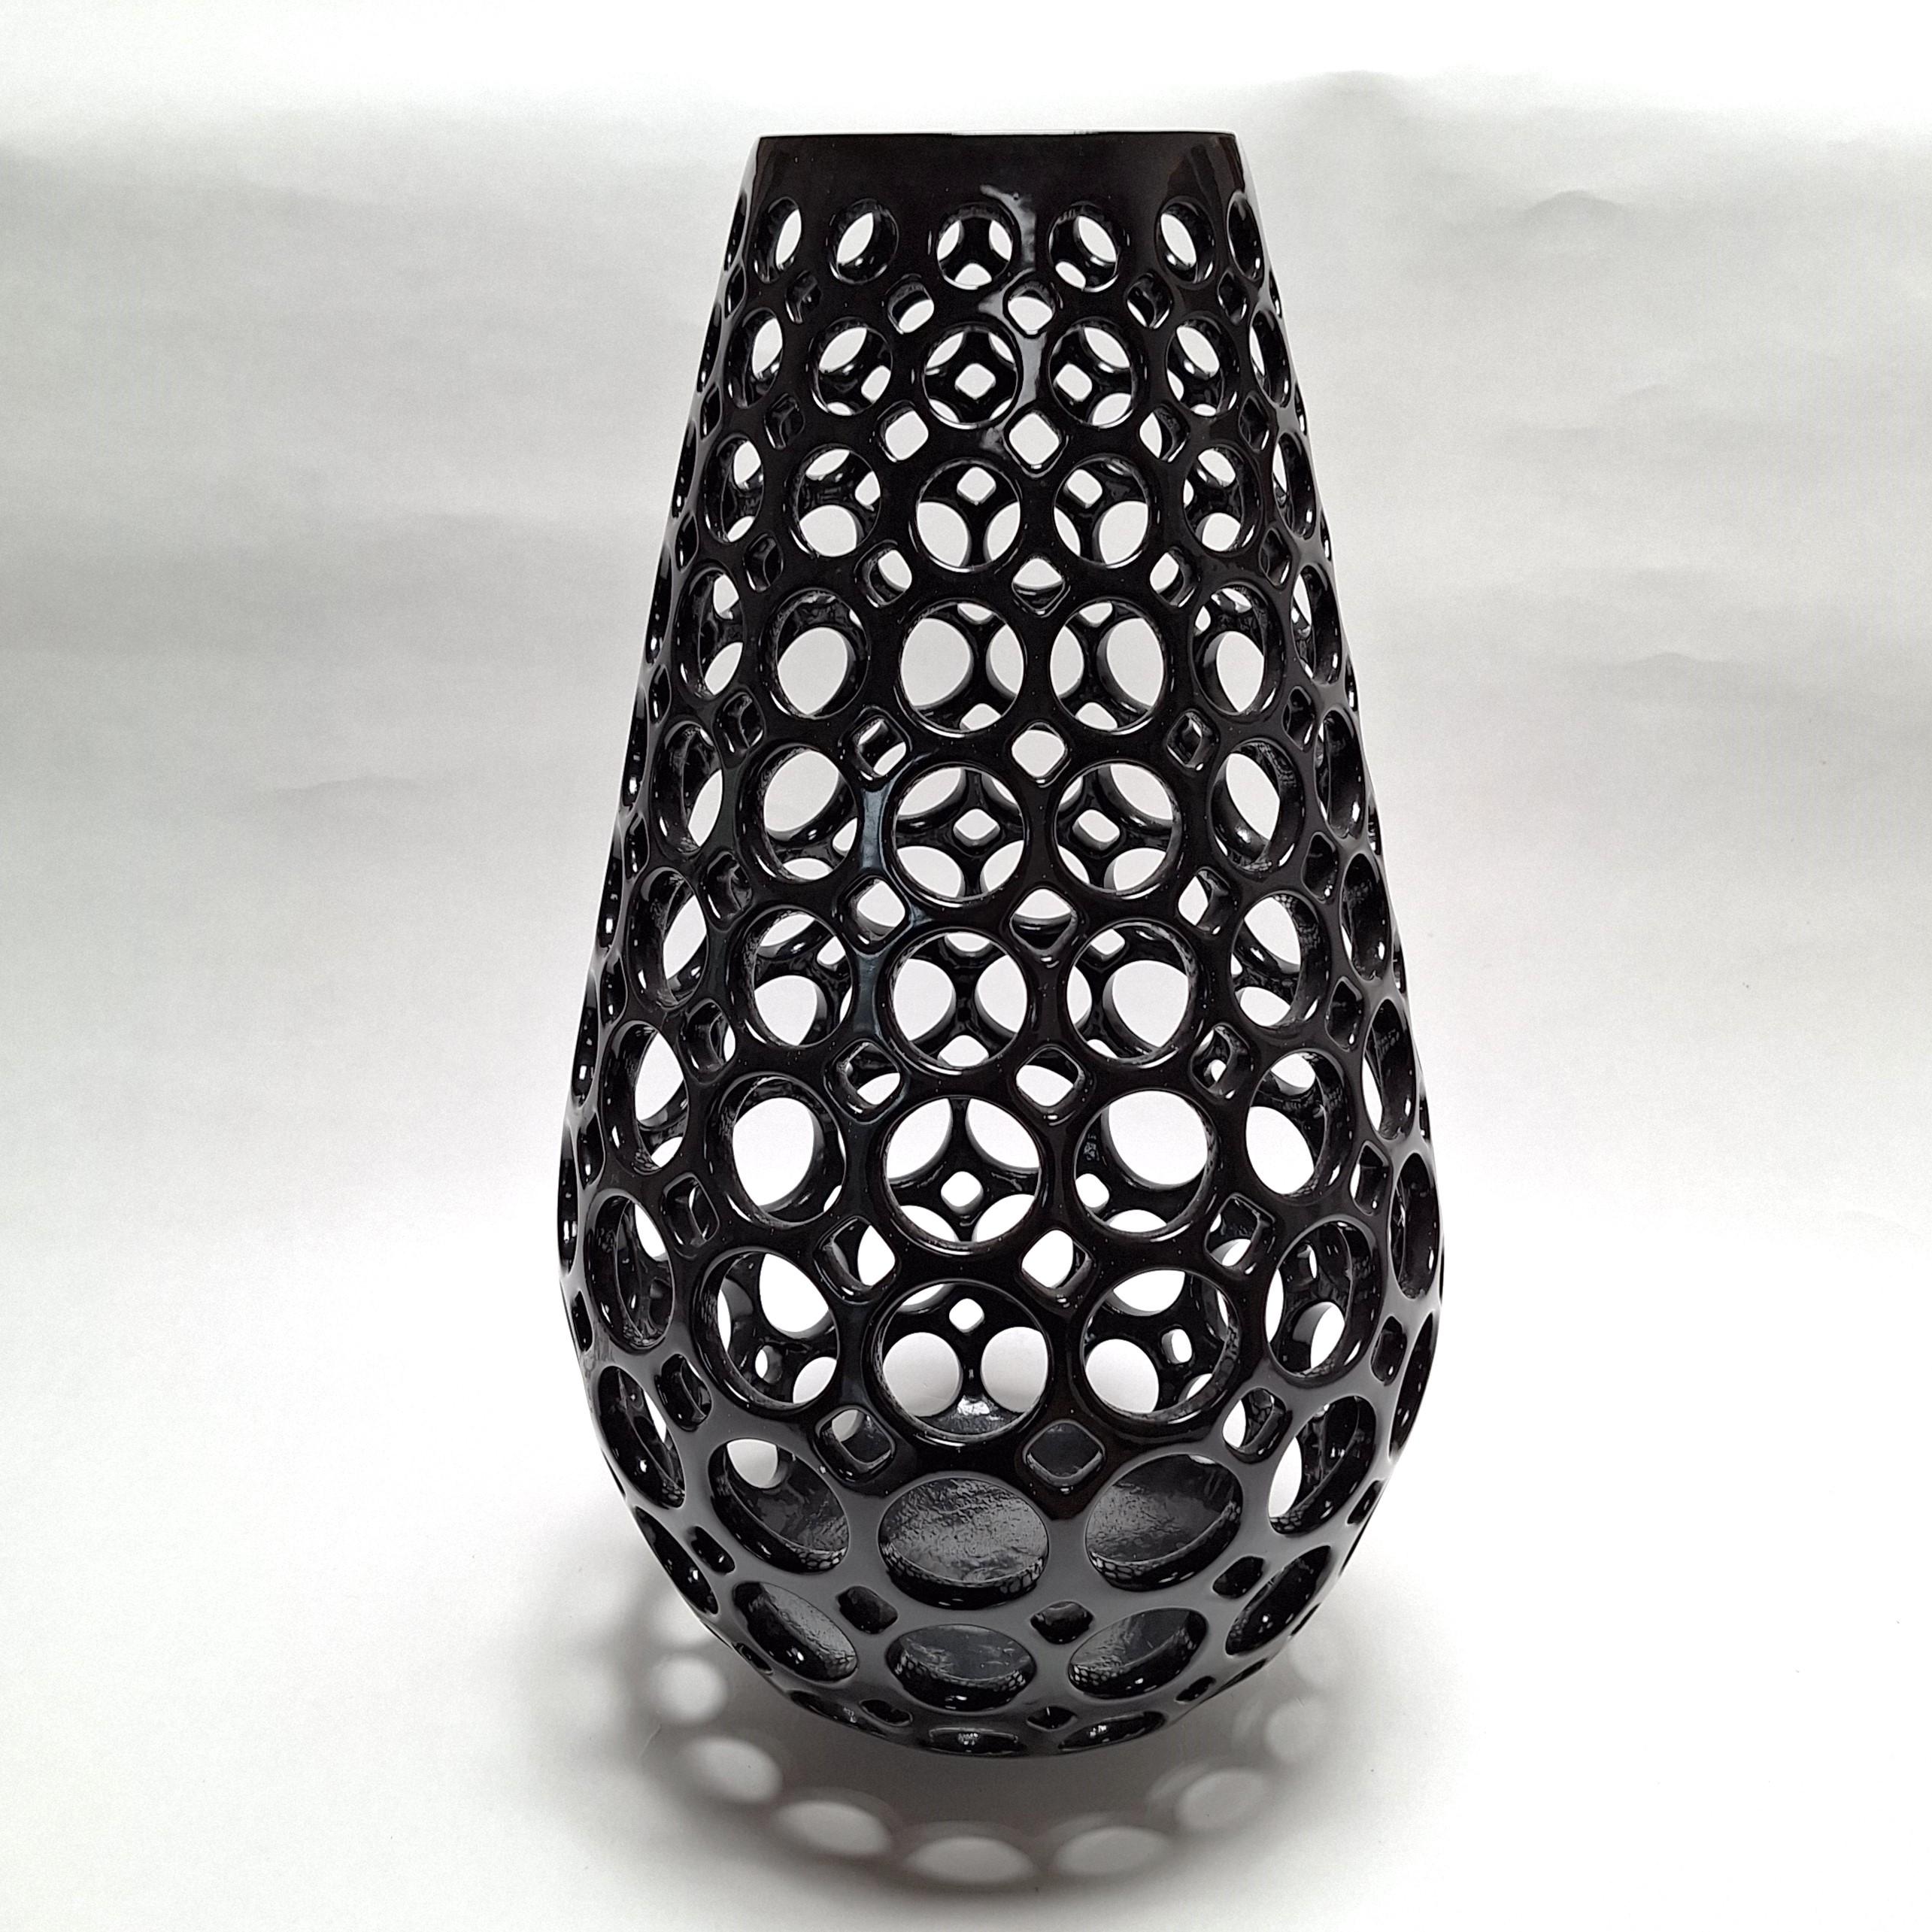 Elongated Teardrop Round Lace Black - contemporary modern ceramic vessel object - Contemporary Sculpture by Lynne Meade